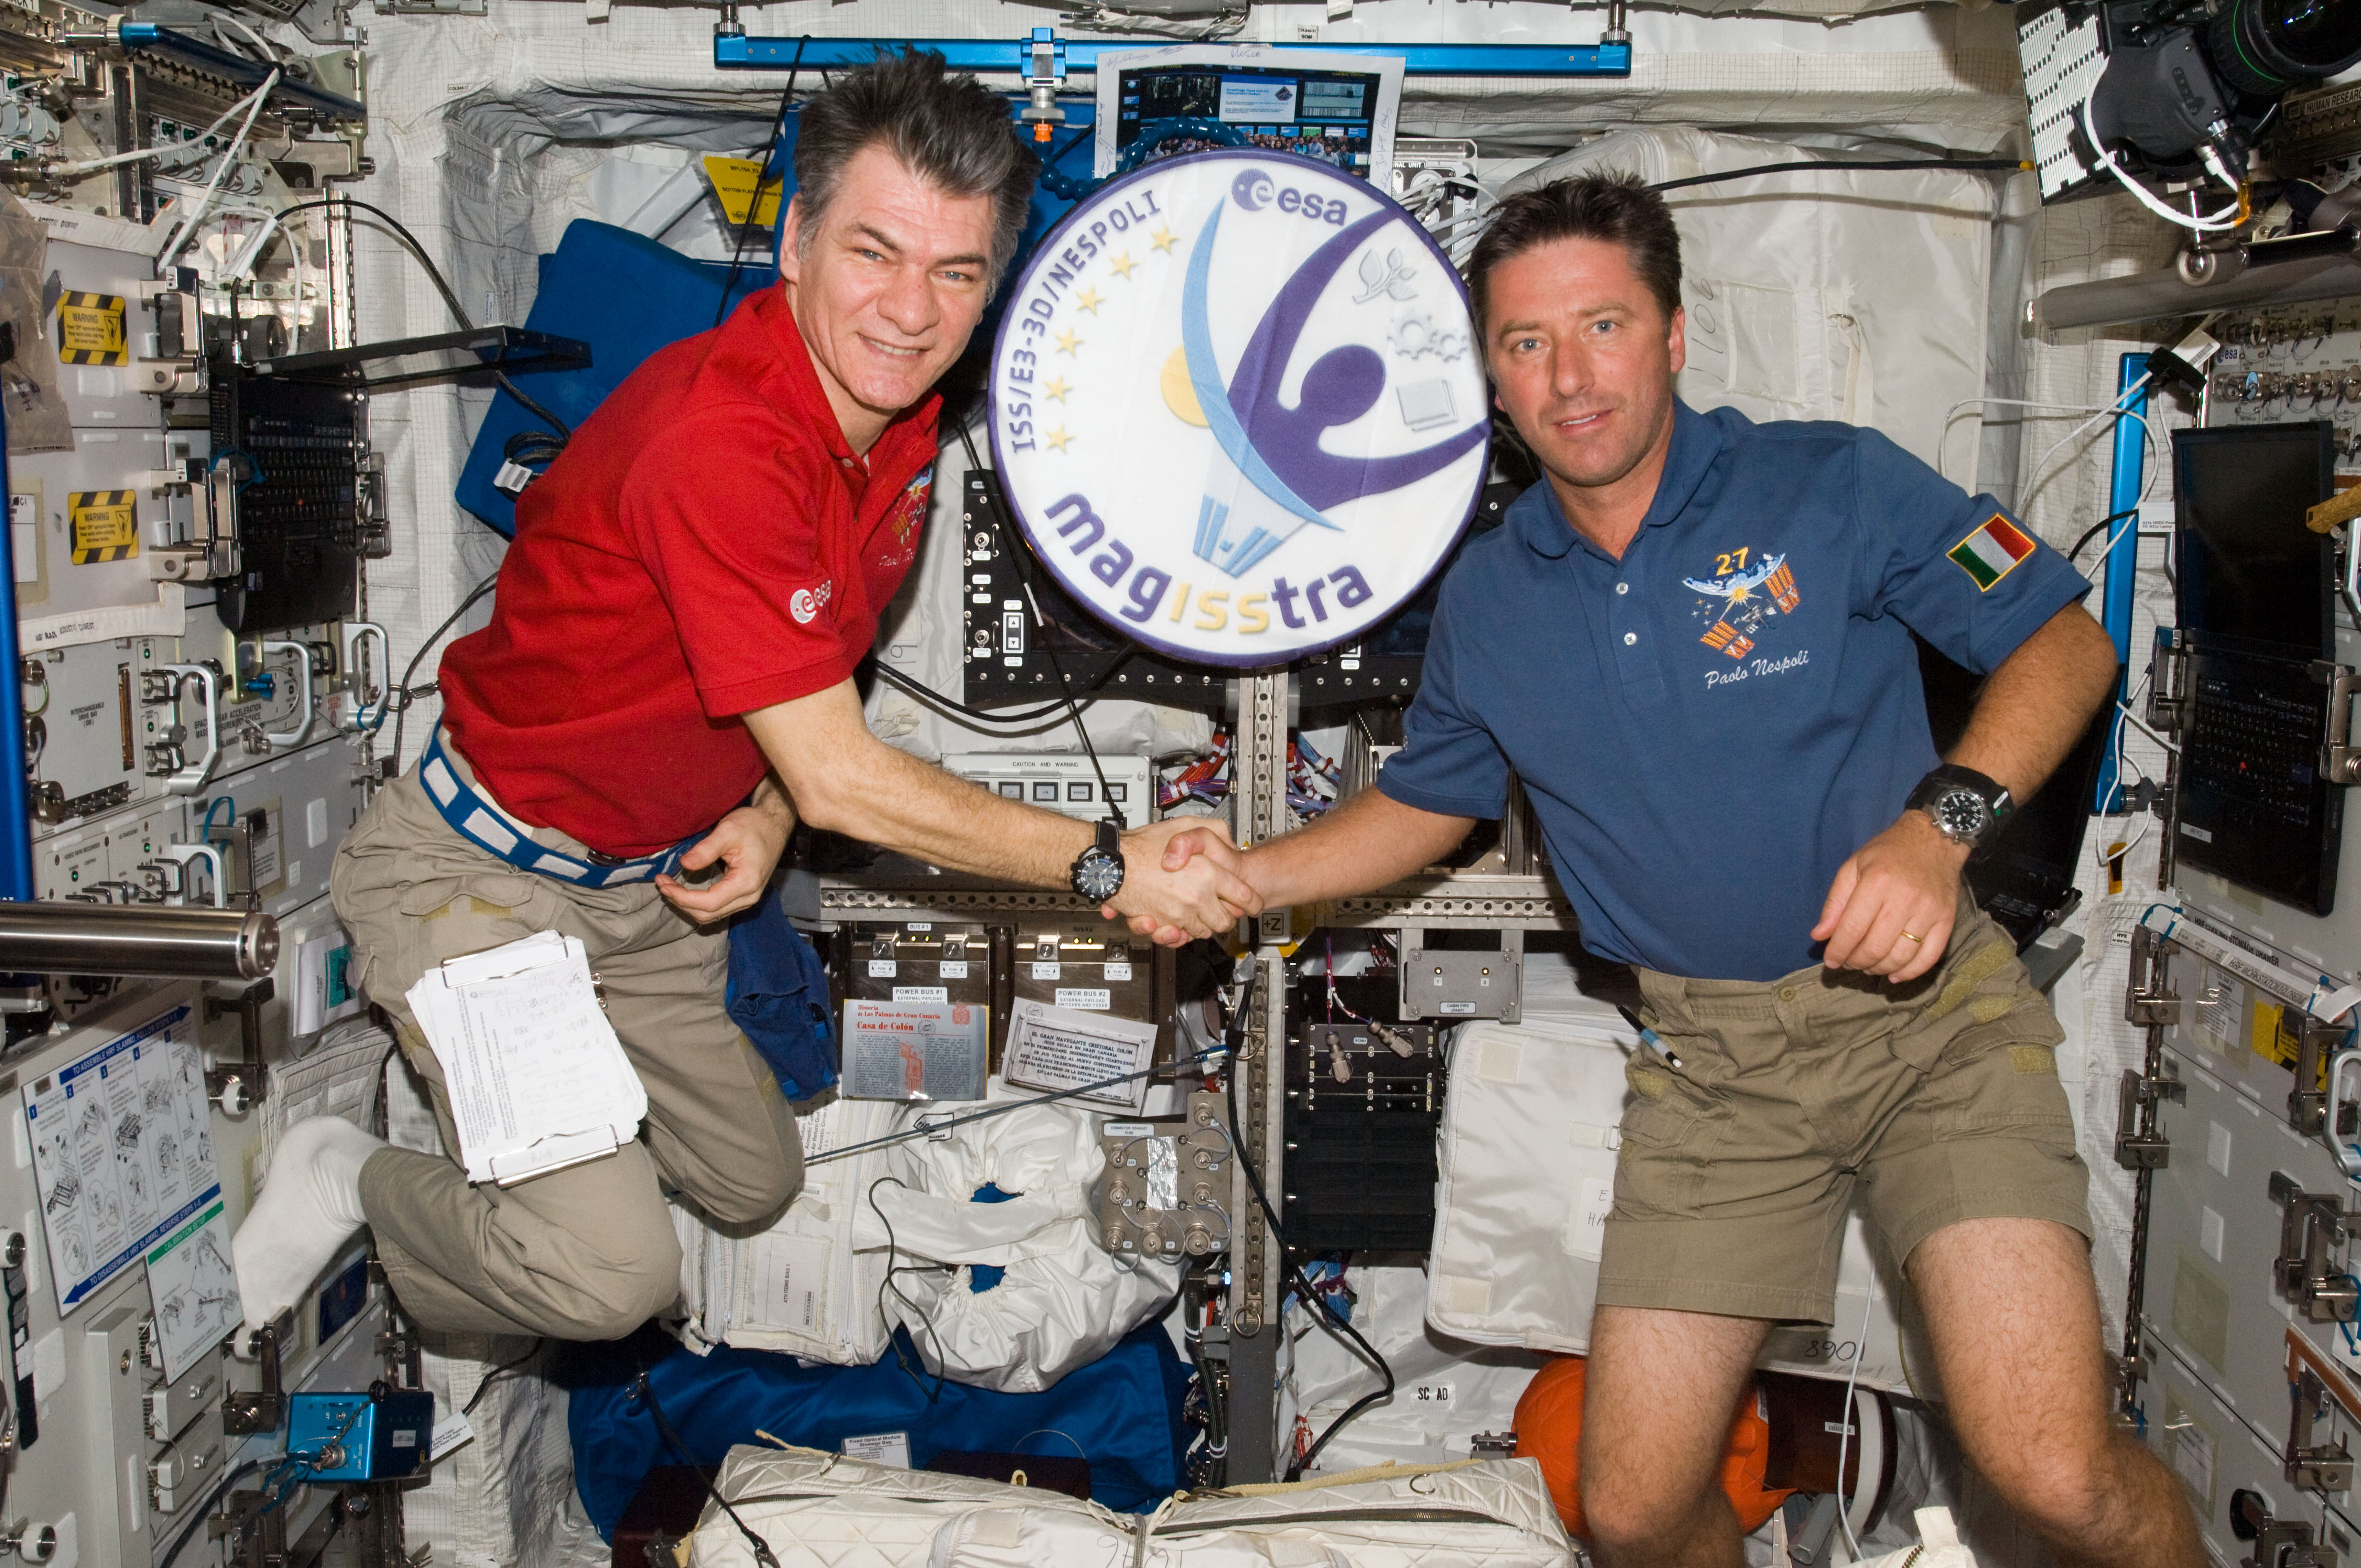 Roberto Vittori (right), who turns 50 today, is pictured with fellow Italian astronaut Paolo Nespoli in Europe's Columbus laboratory, aboard the International Space Station (ISS) in May 2011. Photo Credit: NASA